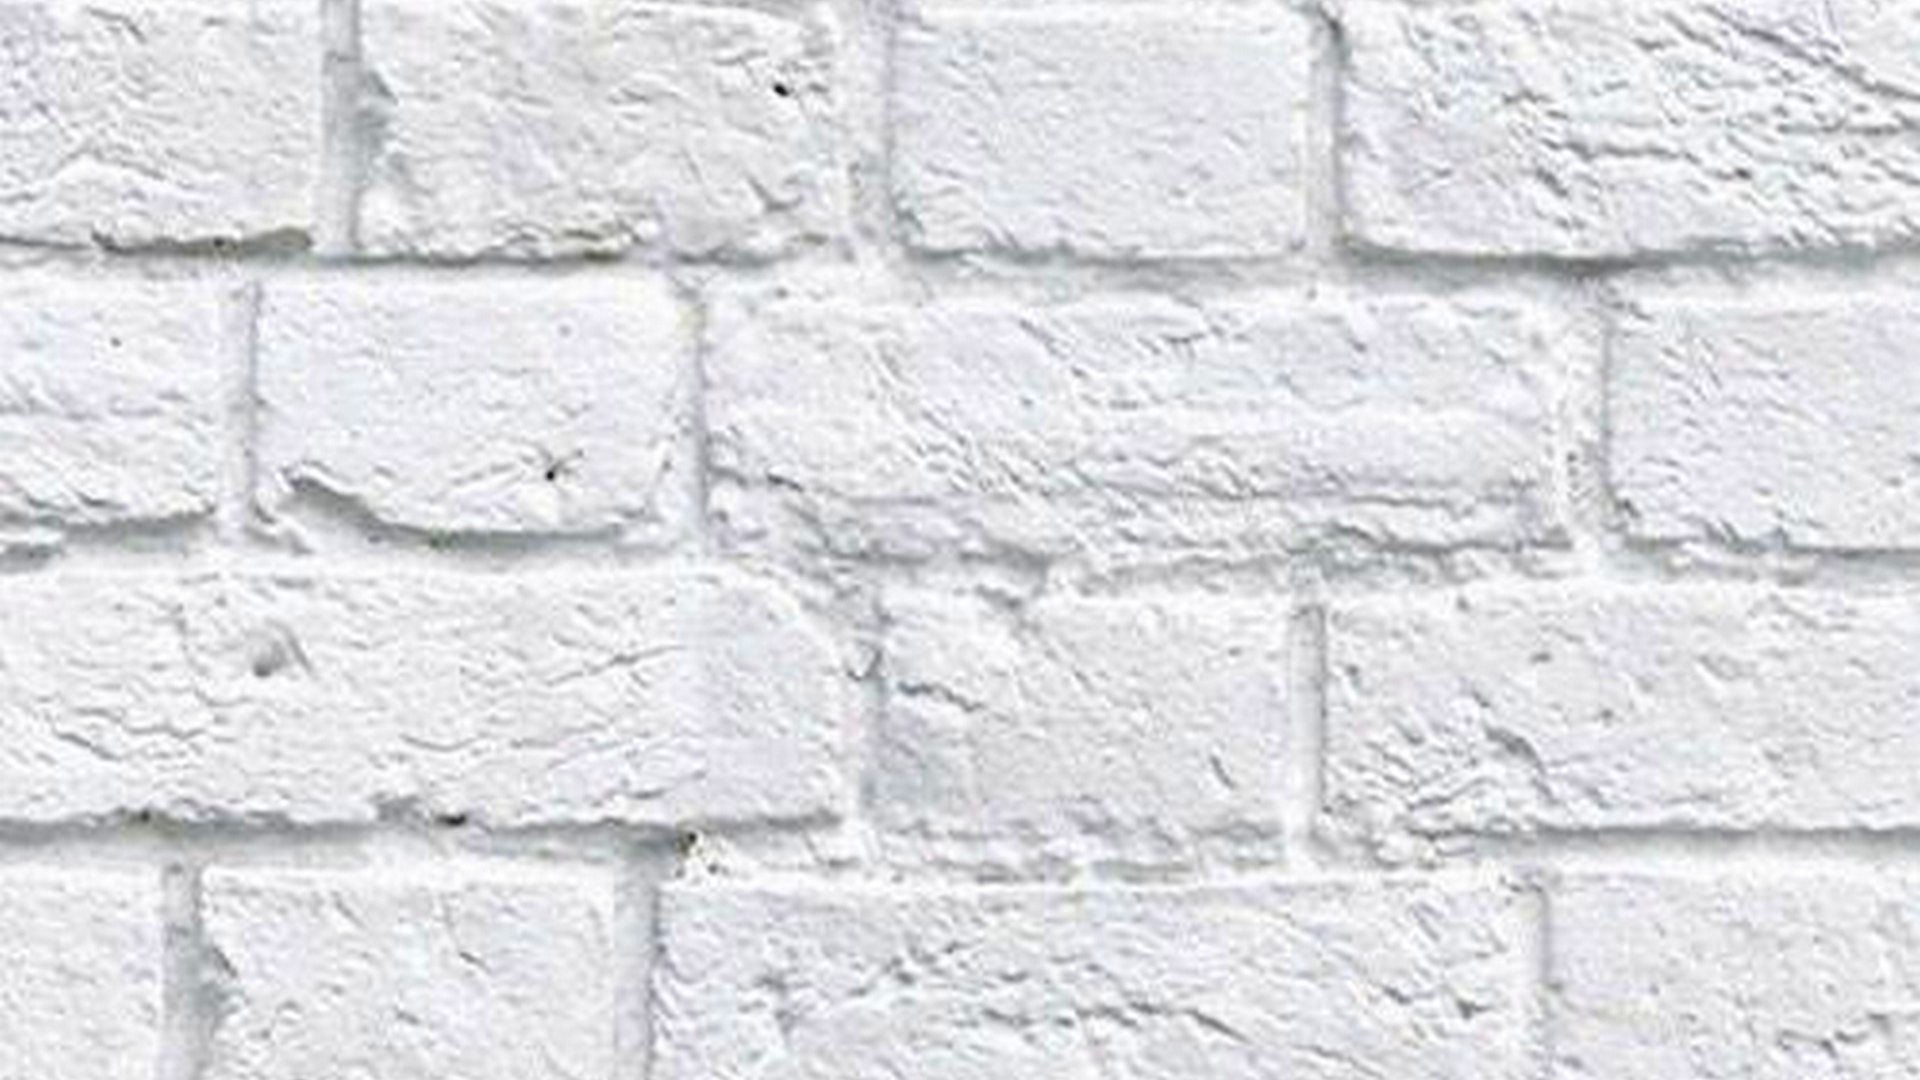 White Brick Desktop Wallpaper with high-resolution 1920x1080 pixel. You can use this wallpaper for your Windows and Mac OS computers as well as your Android and iPhone smartphones